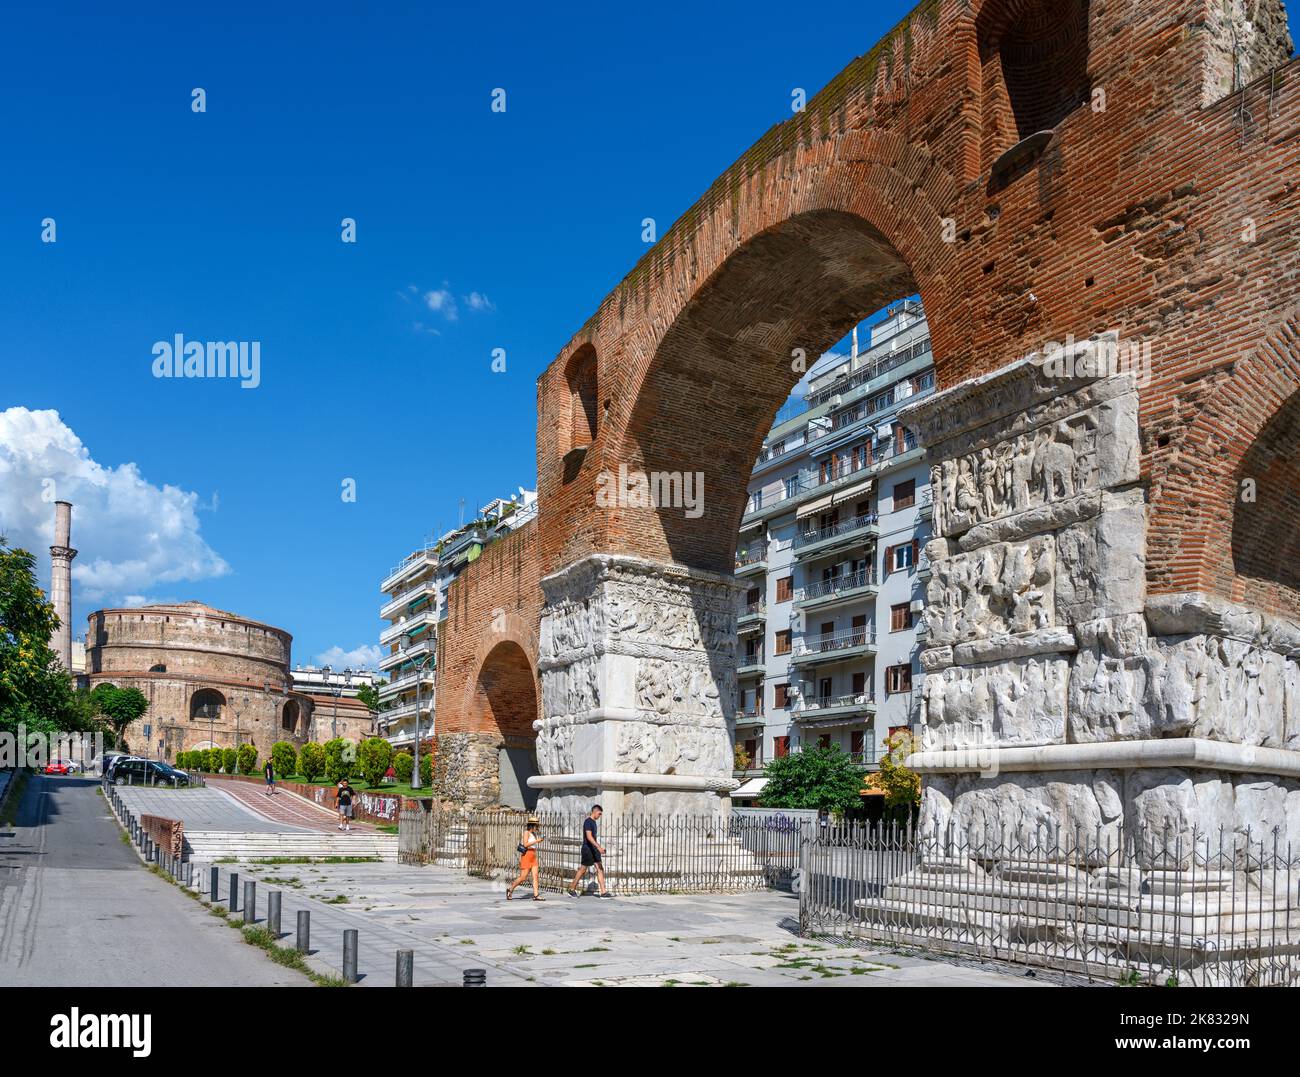 The Arch of Galerius and the Rotunda of Galerius, Thessaloniki, Macedonia, Greece Stock Photo